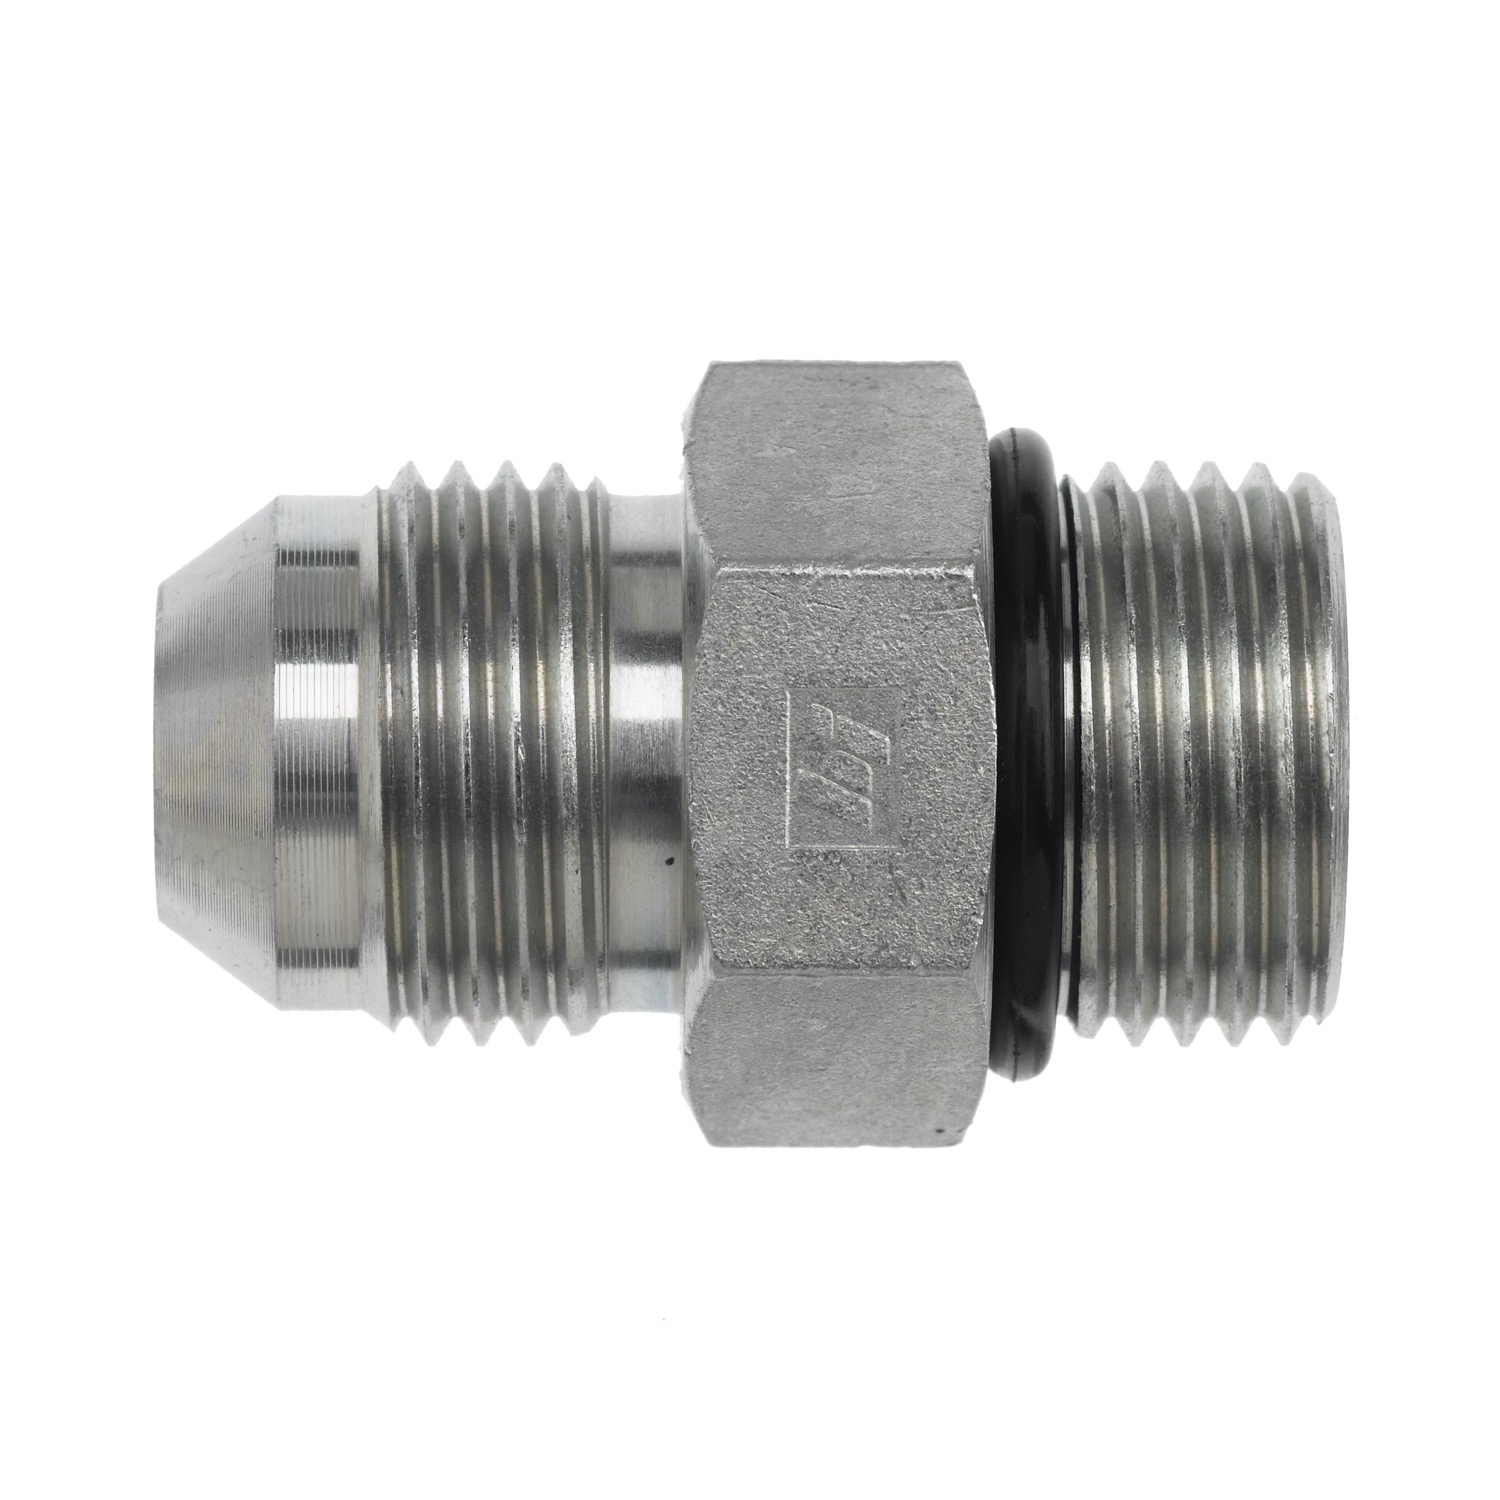 Hydraulic Hose Adapters - Straight Fitting, O-Ring Boss to JIC 37° Flare, 6400-0 Series